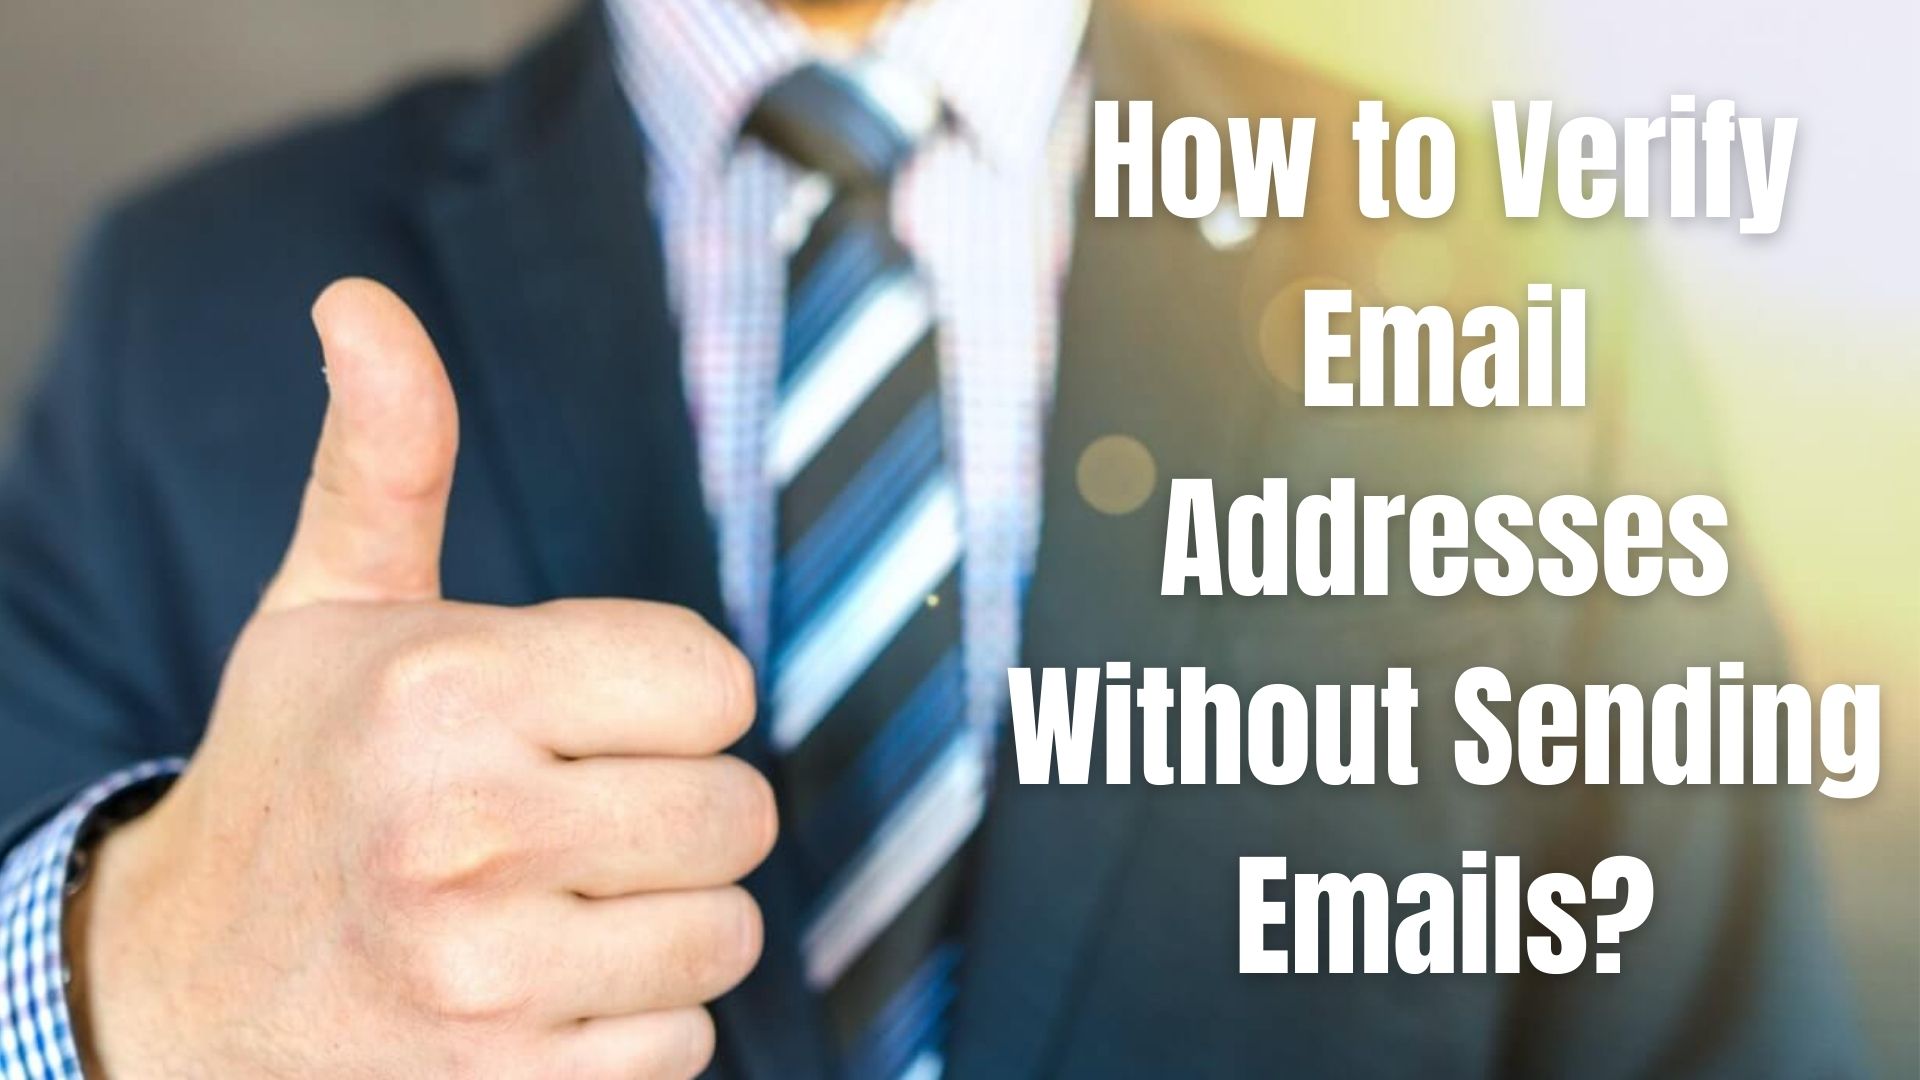 How to Verify Email Addresses Without Sending Emails?